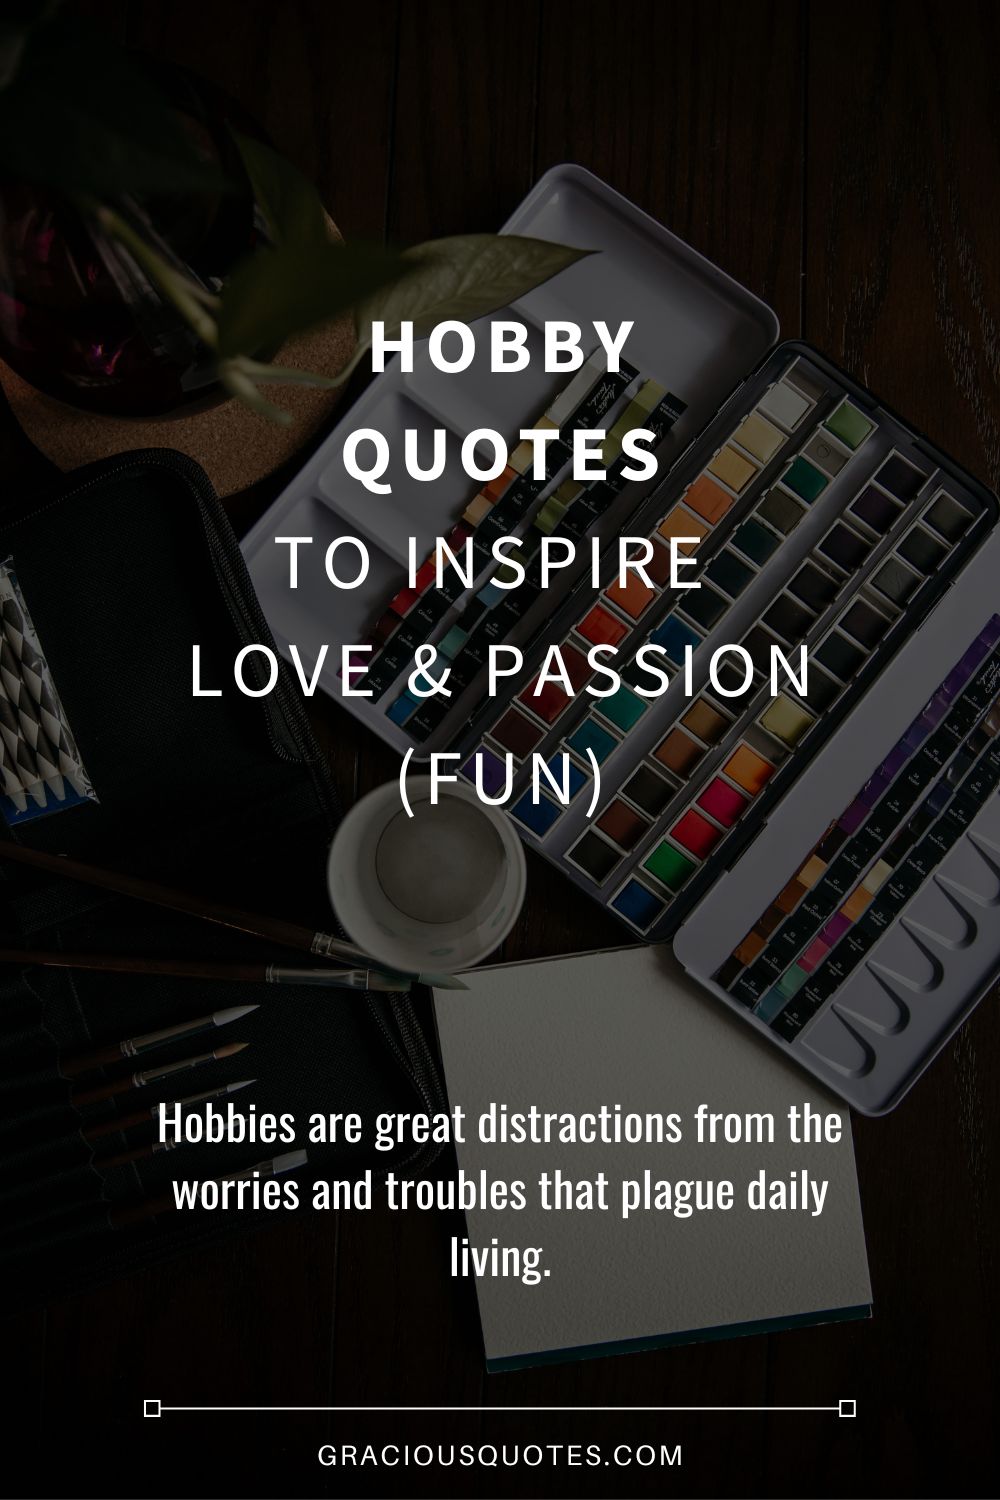 Hobby Quotes to Inspire Love & Passion (FUN) - Gracious Quotes